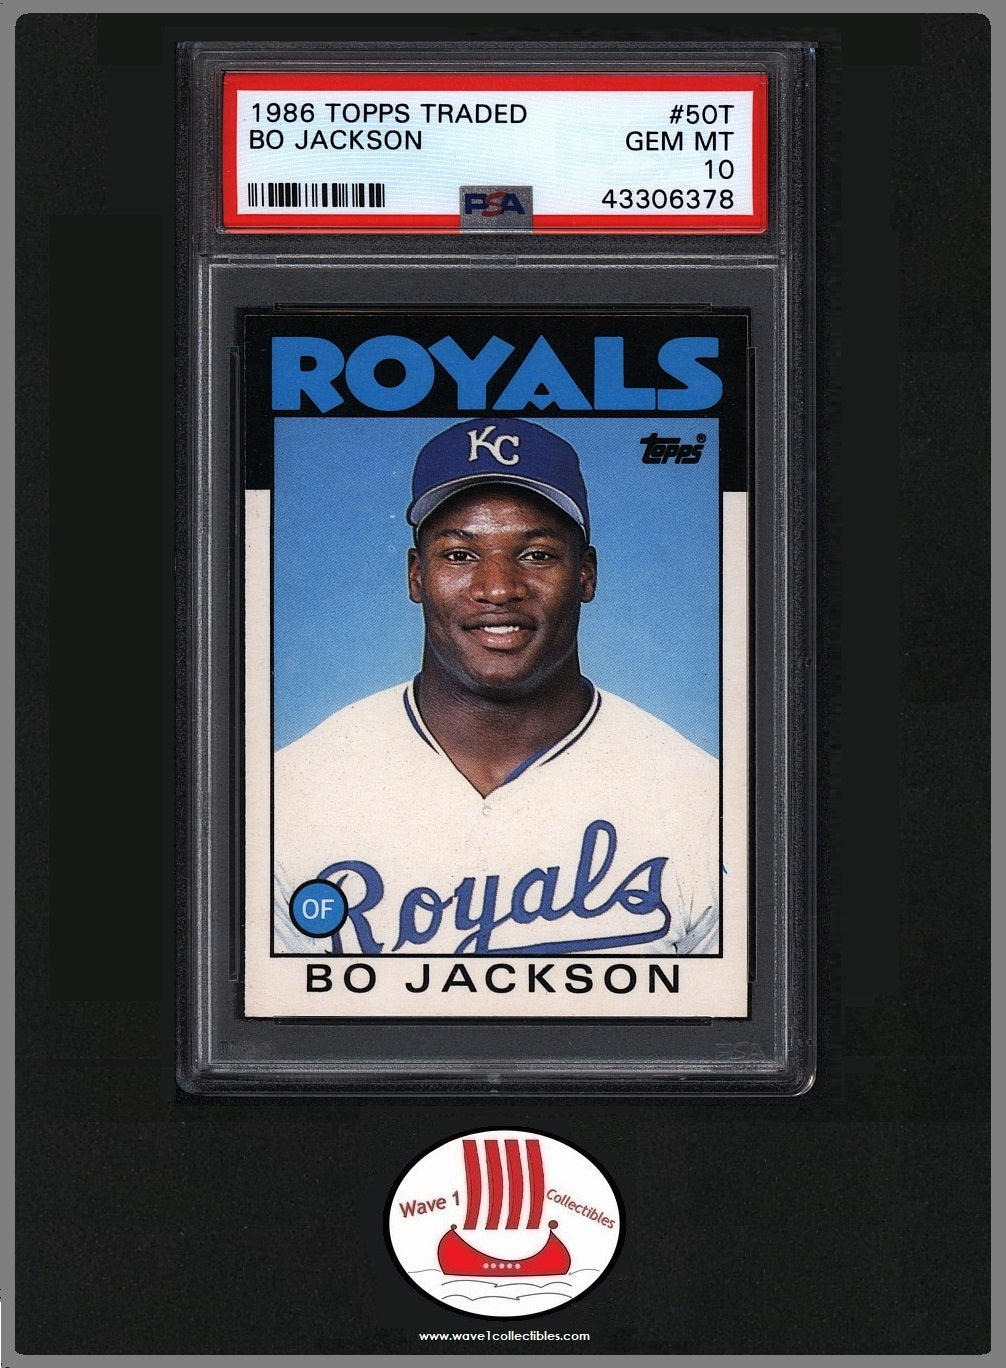 Bo Jackson Rookie Card 1986 Topps Traded #50T